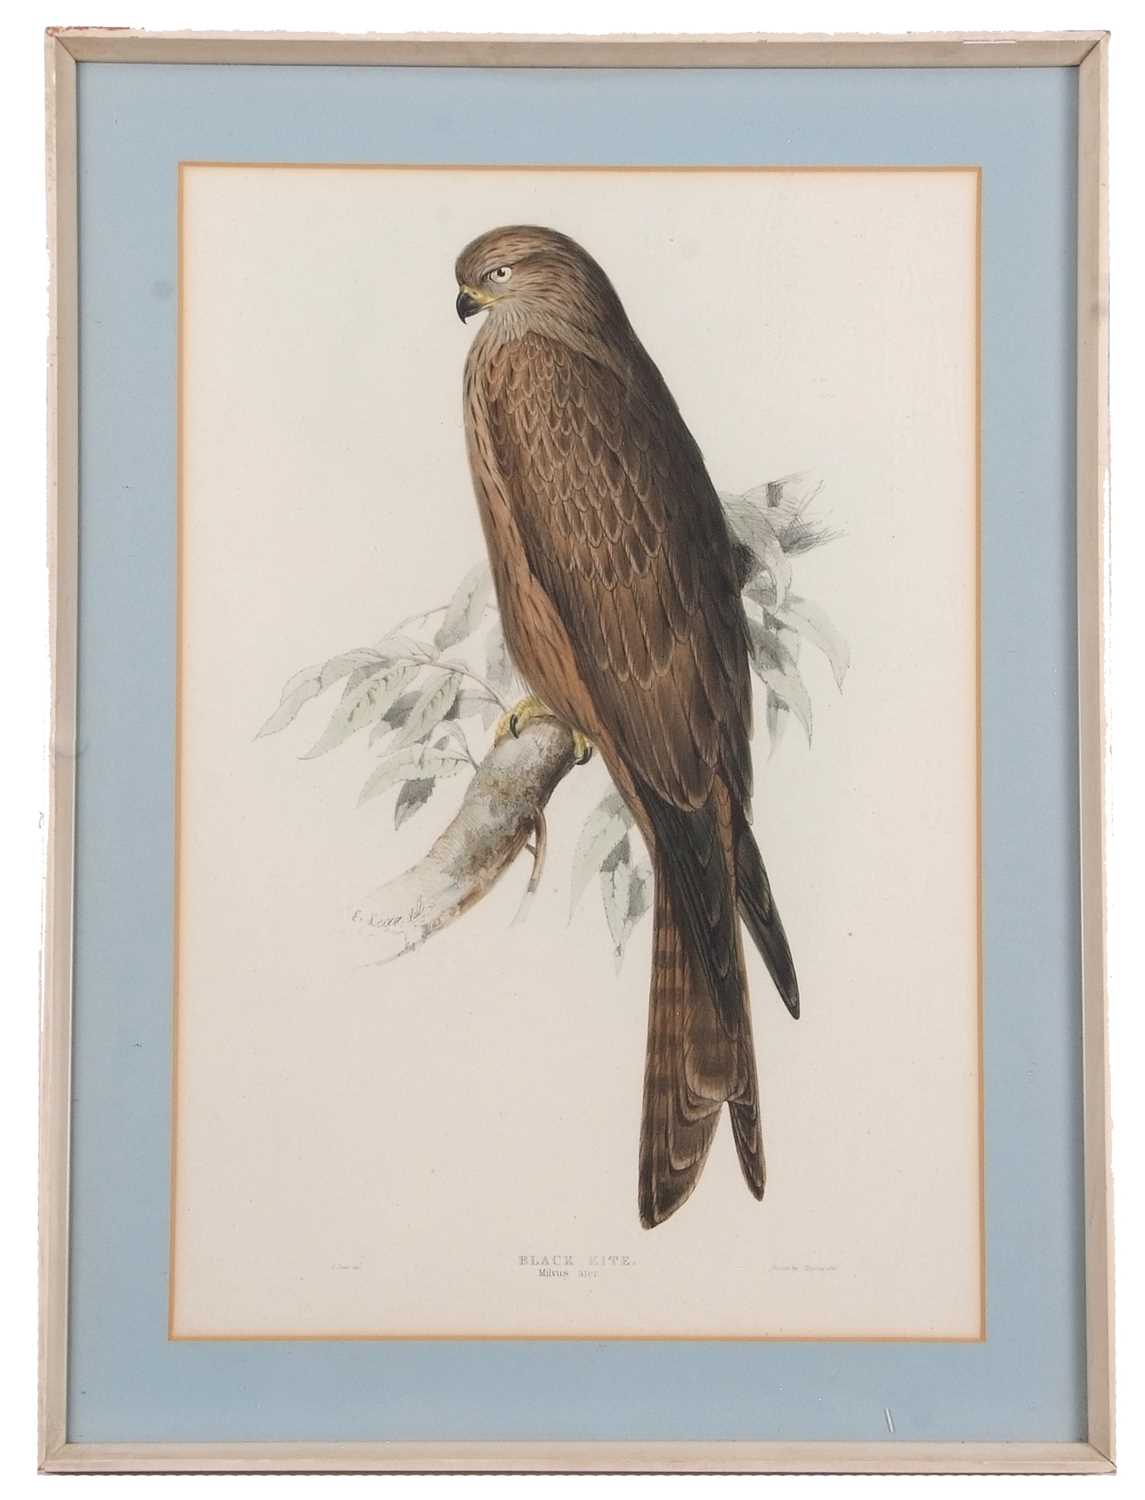 Edward Lear (1812-1888), 'Black Kite. Milvis ater', hand coloured lithograph, printed by Charles - Image 2 of 2